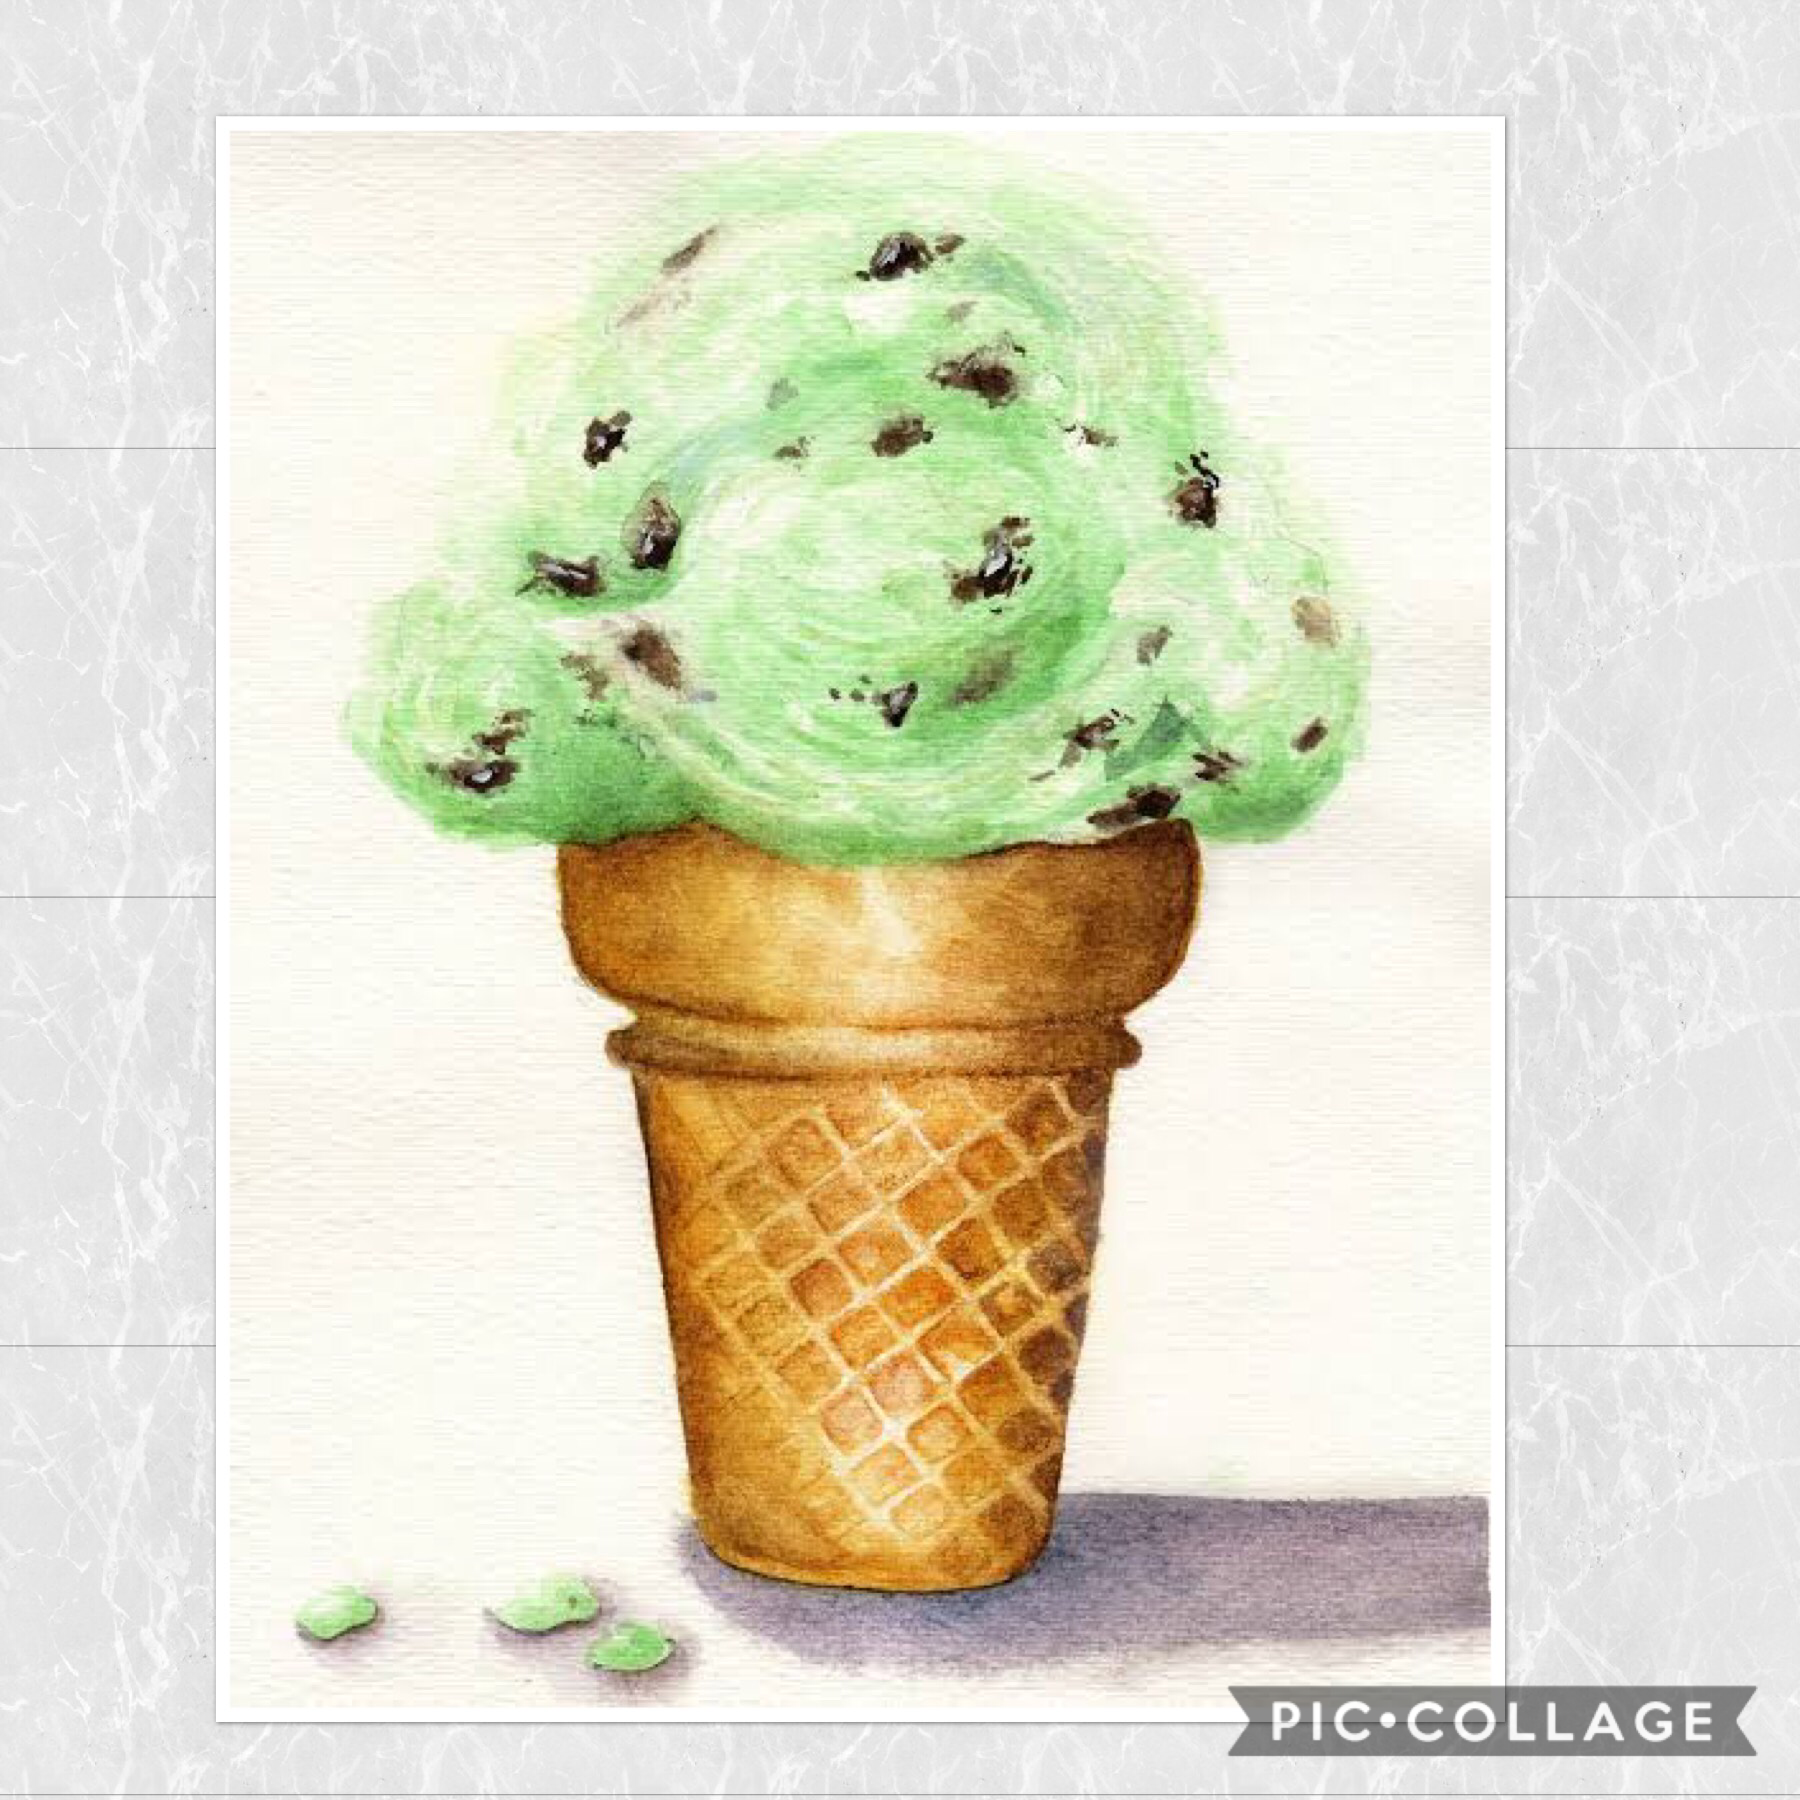 Mint with choc chip ice cream is my fav